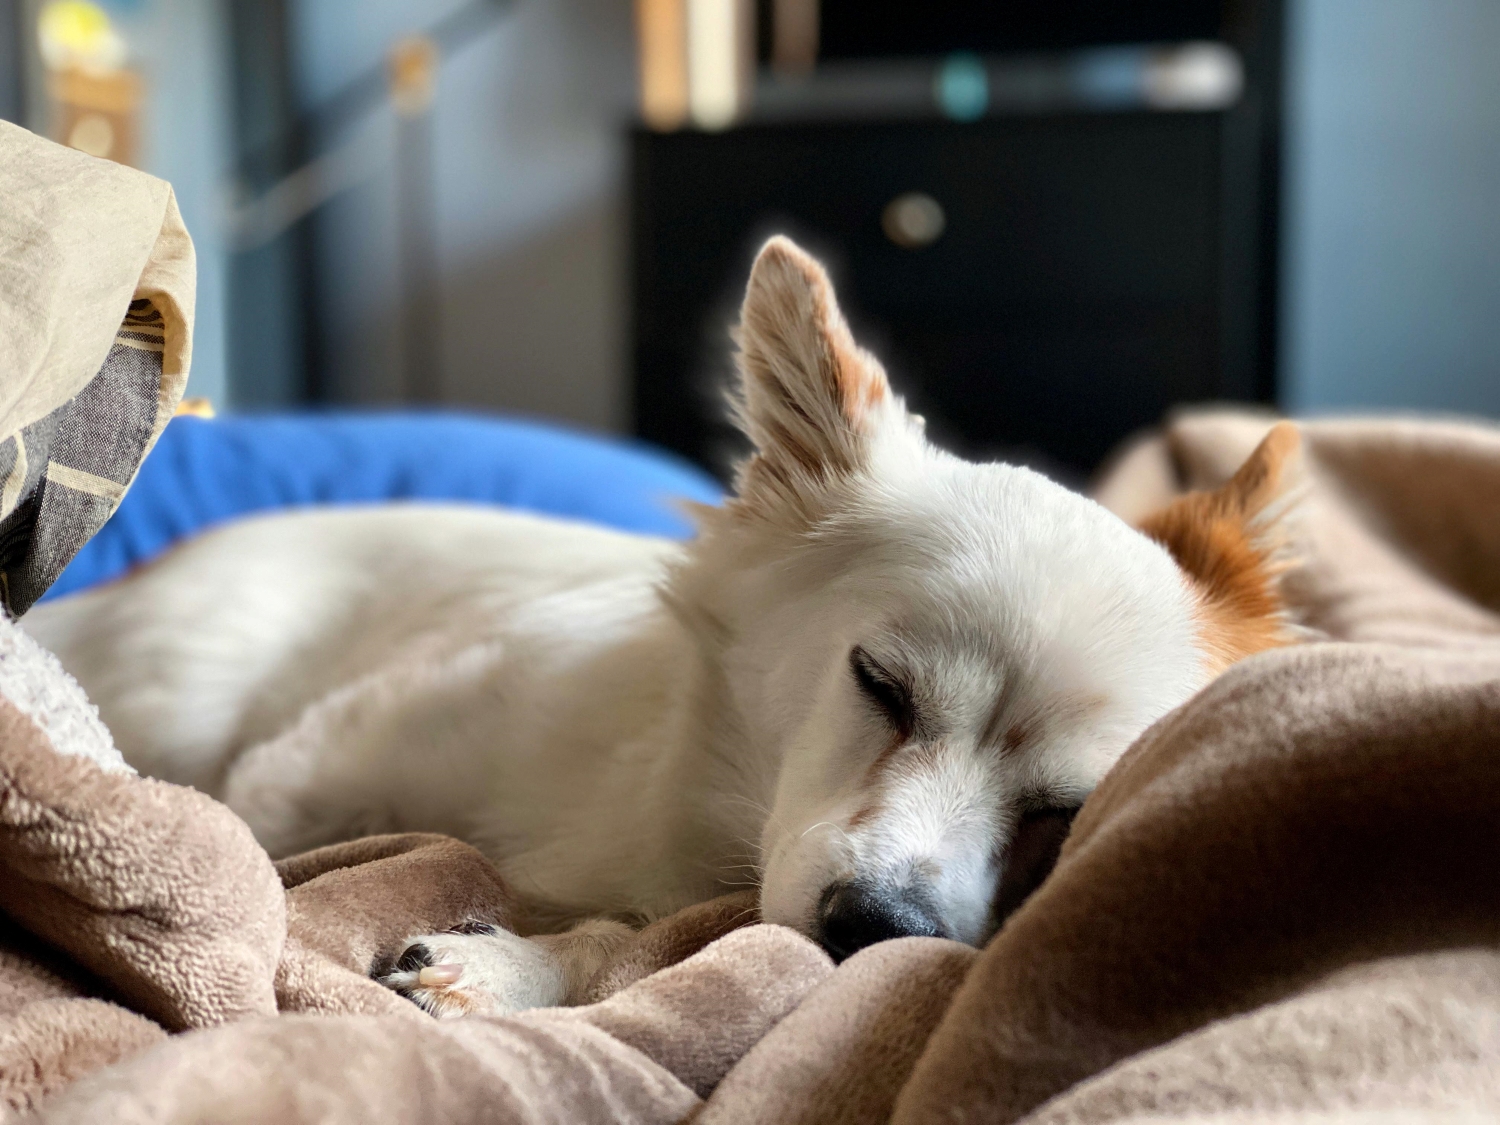 A portrait mode photo of a dog lying on a bed.